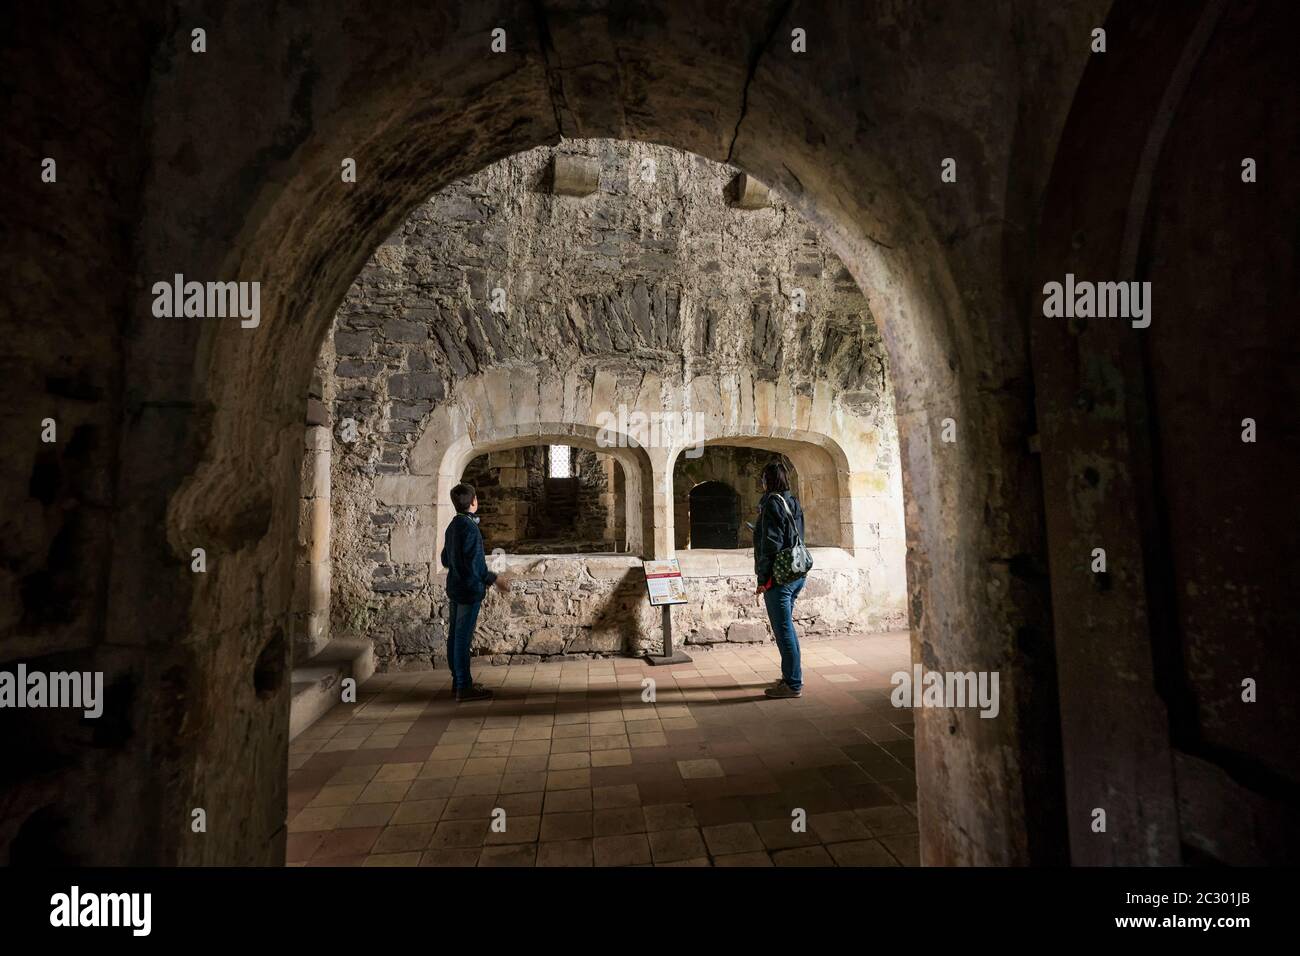 Arched entrance to the kitchen ruin inside Doune castle, Stirling, Scotland, UK, Europe Stock Photo